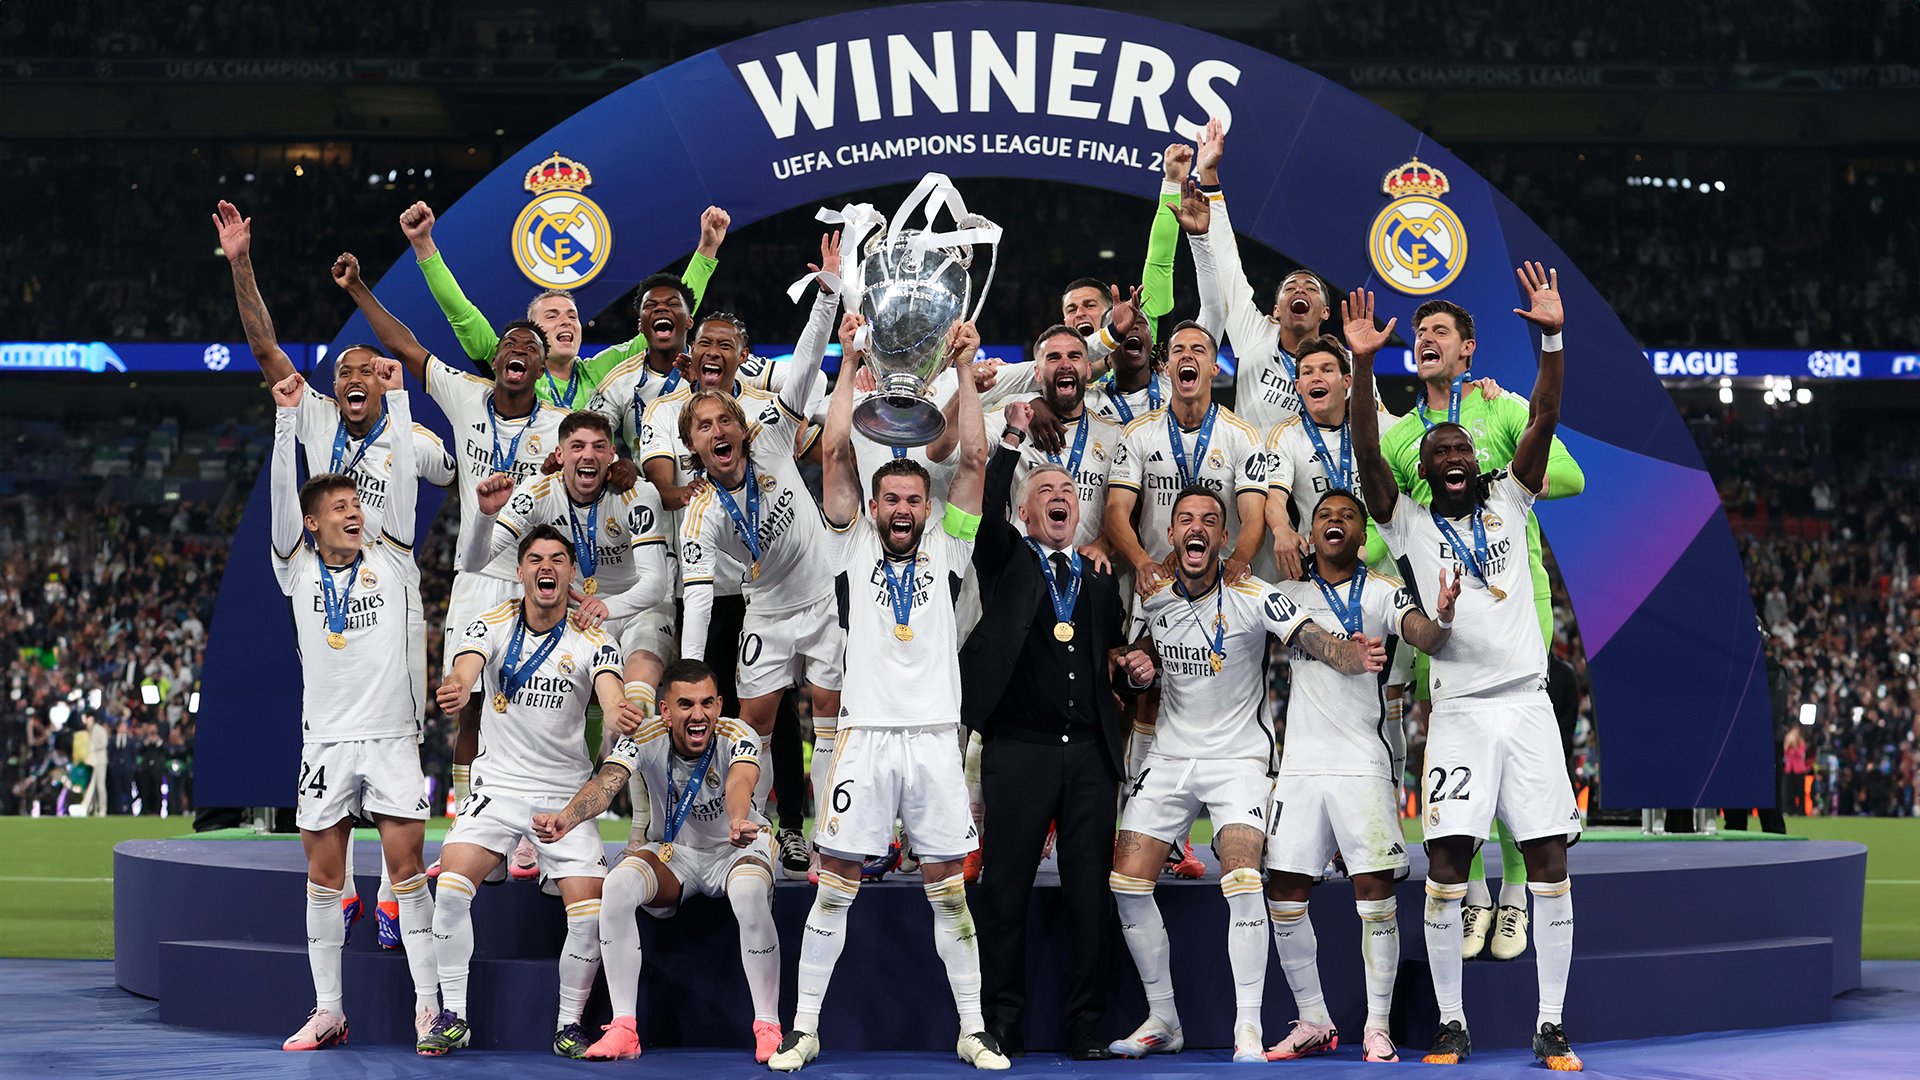 Real Madrid Claims Record 15th UEFA Champions League Title After Beating Dortmund